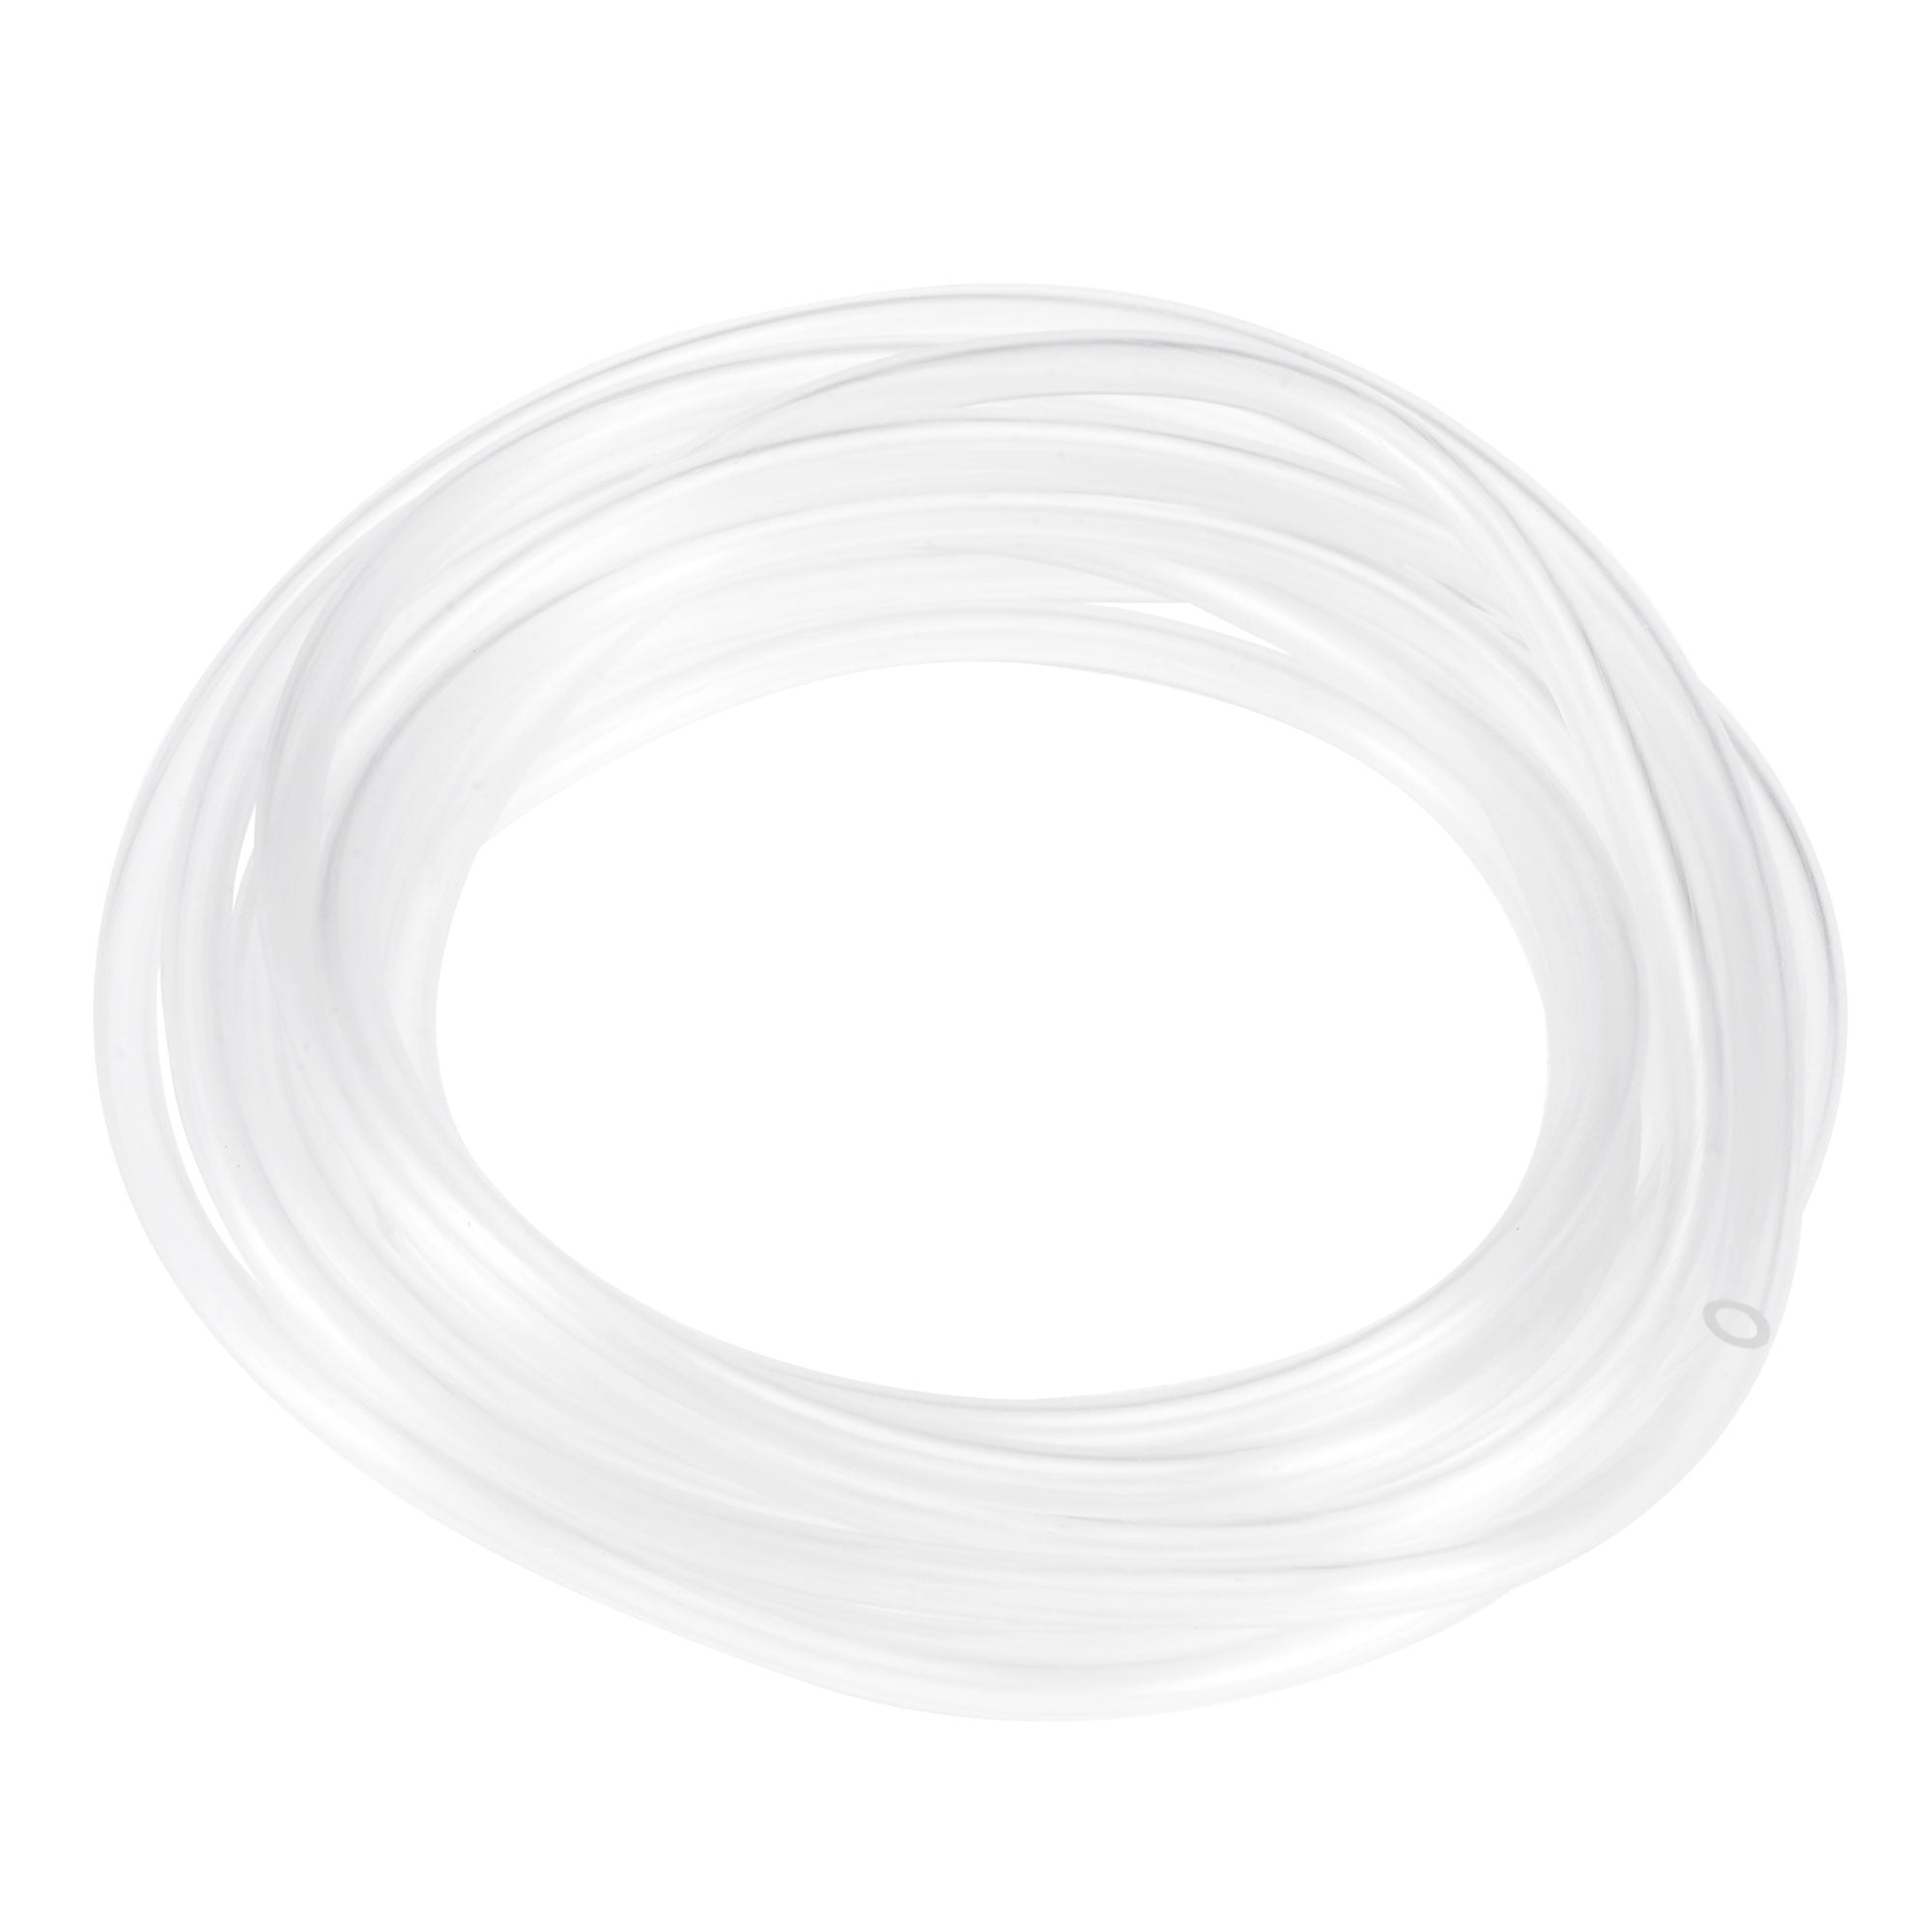 Clear Vinyl Standard Size Airline Water Tubing 3/16" ID 1/4" OD 25ft 50ft 100ft 